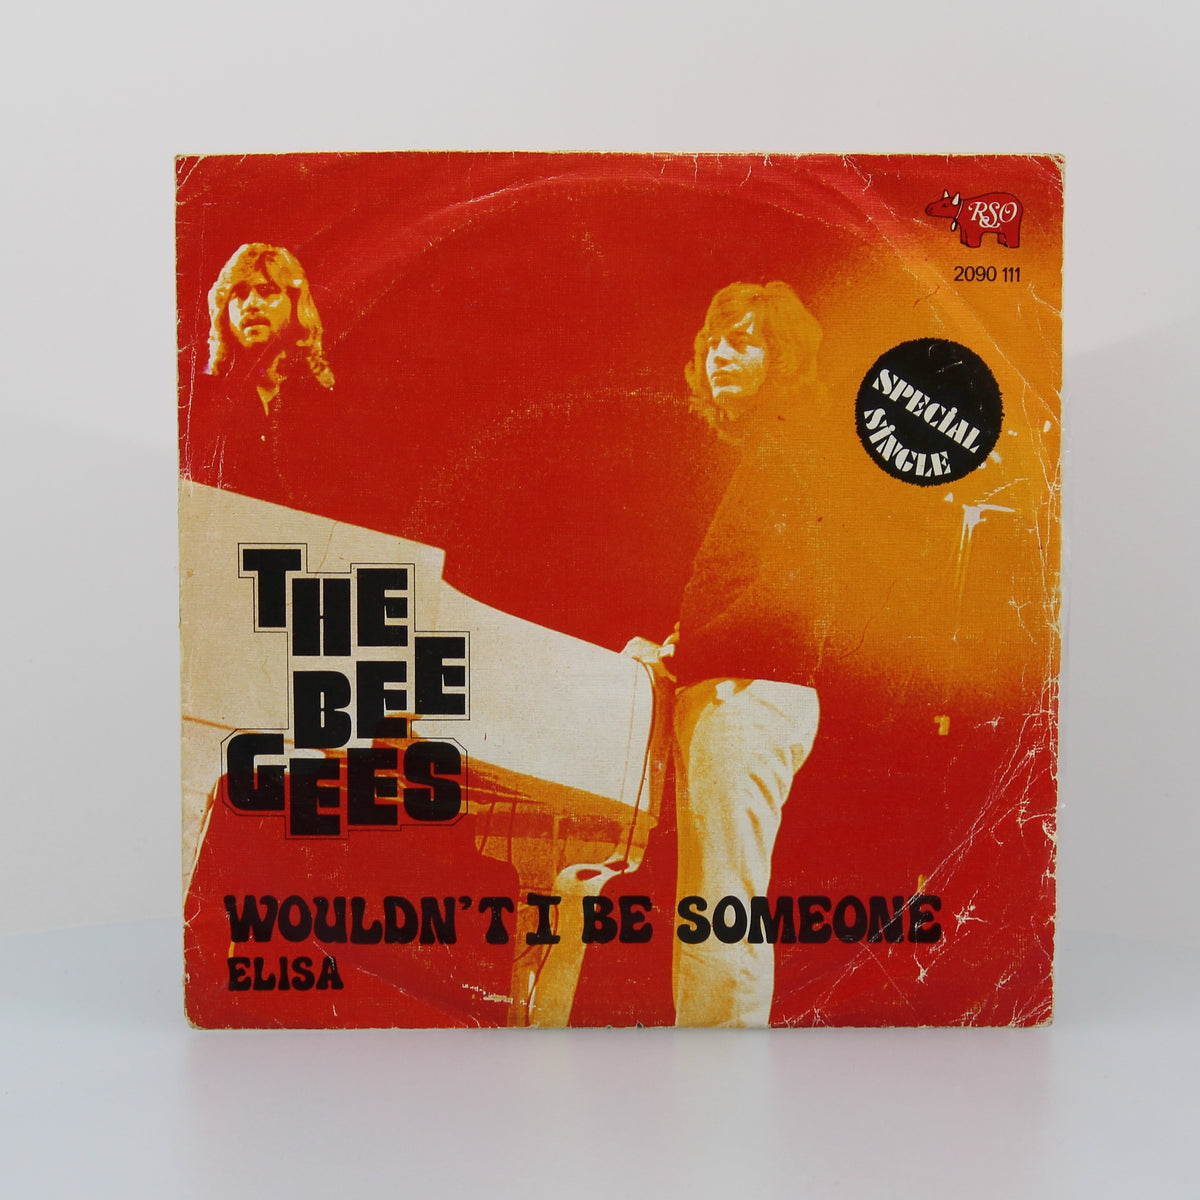 Bee Gees - Wouldn&#39;t I Be Someone, Vinyl 7&quot; Single 45Rpm, Portugal 1973